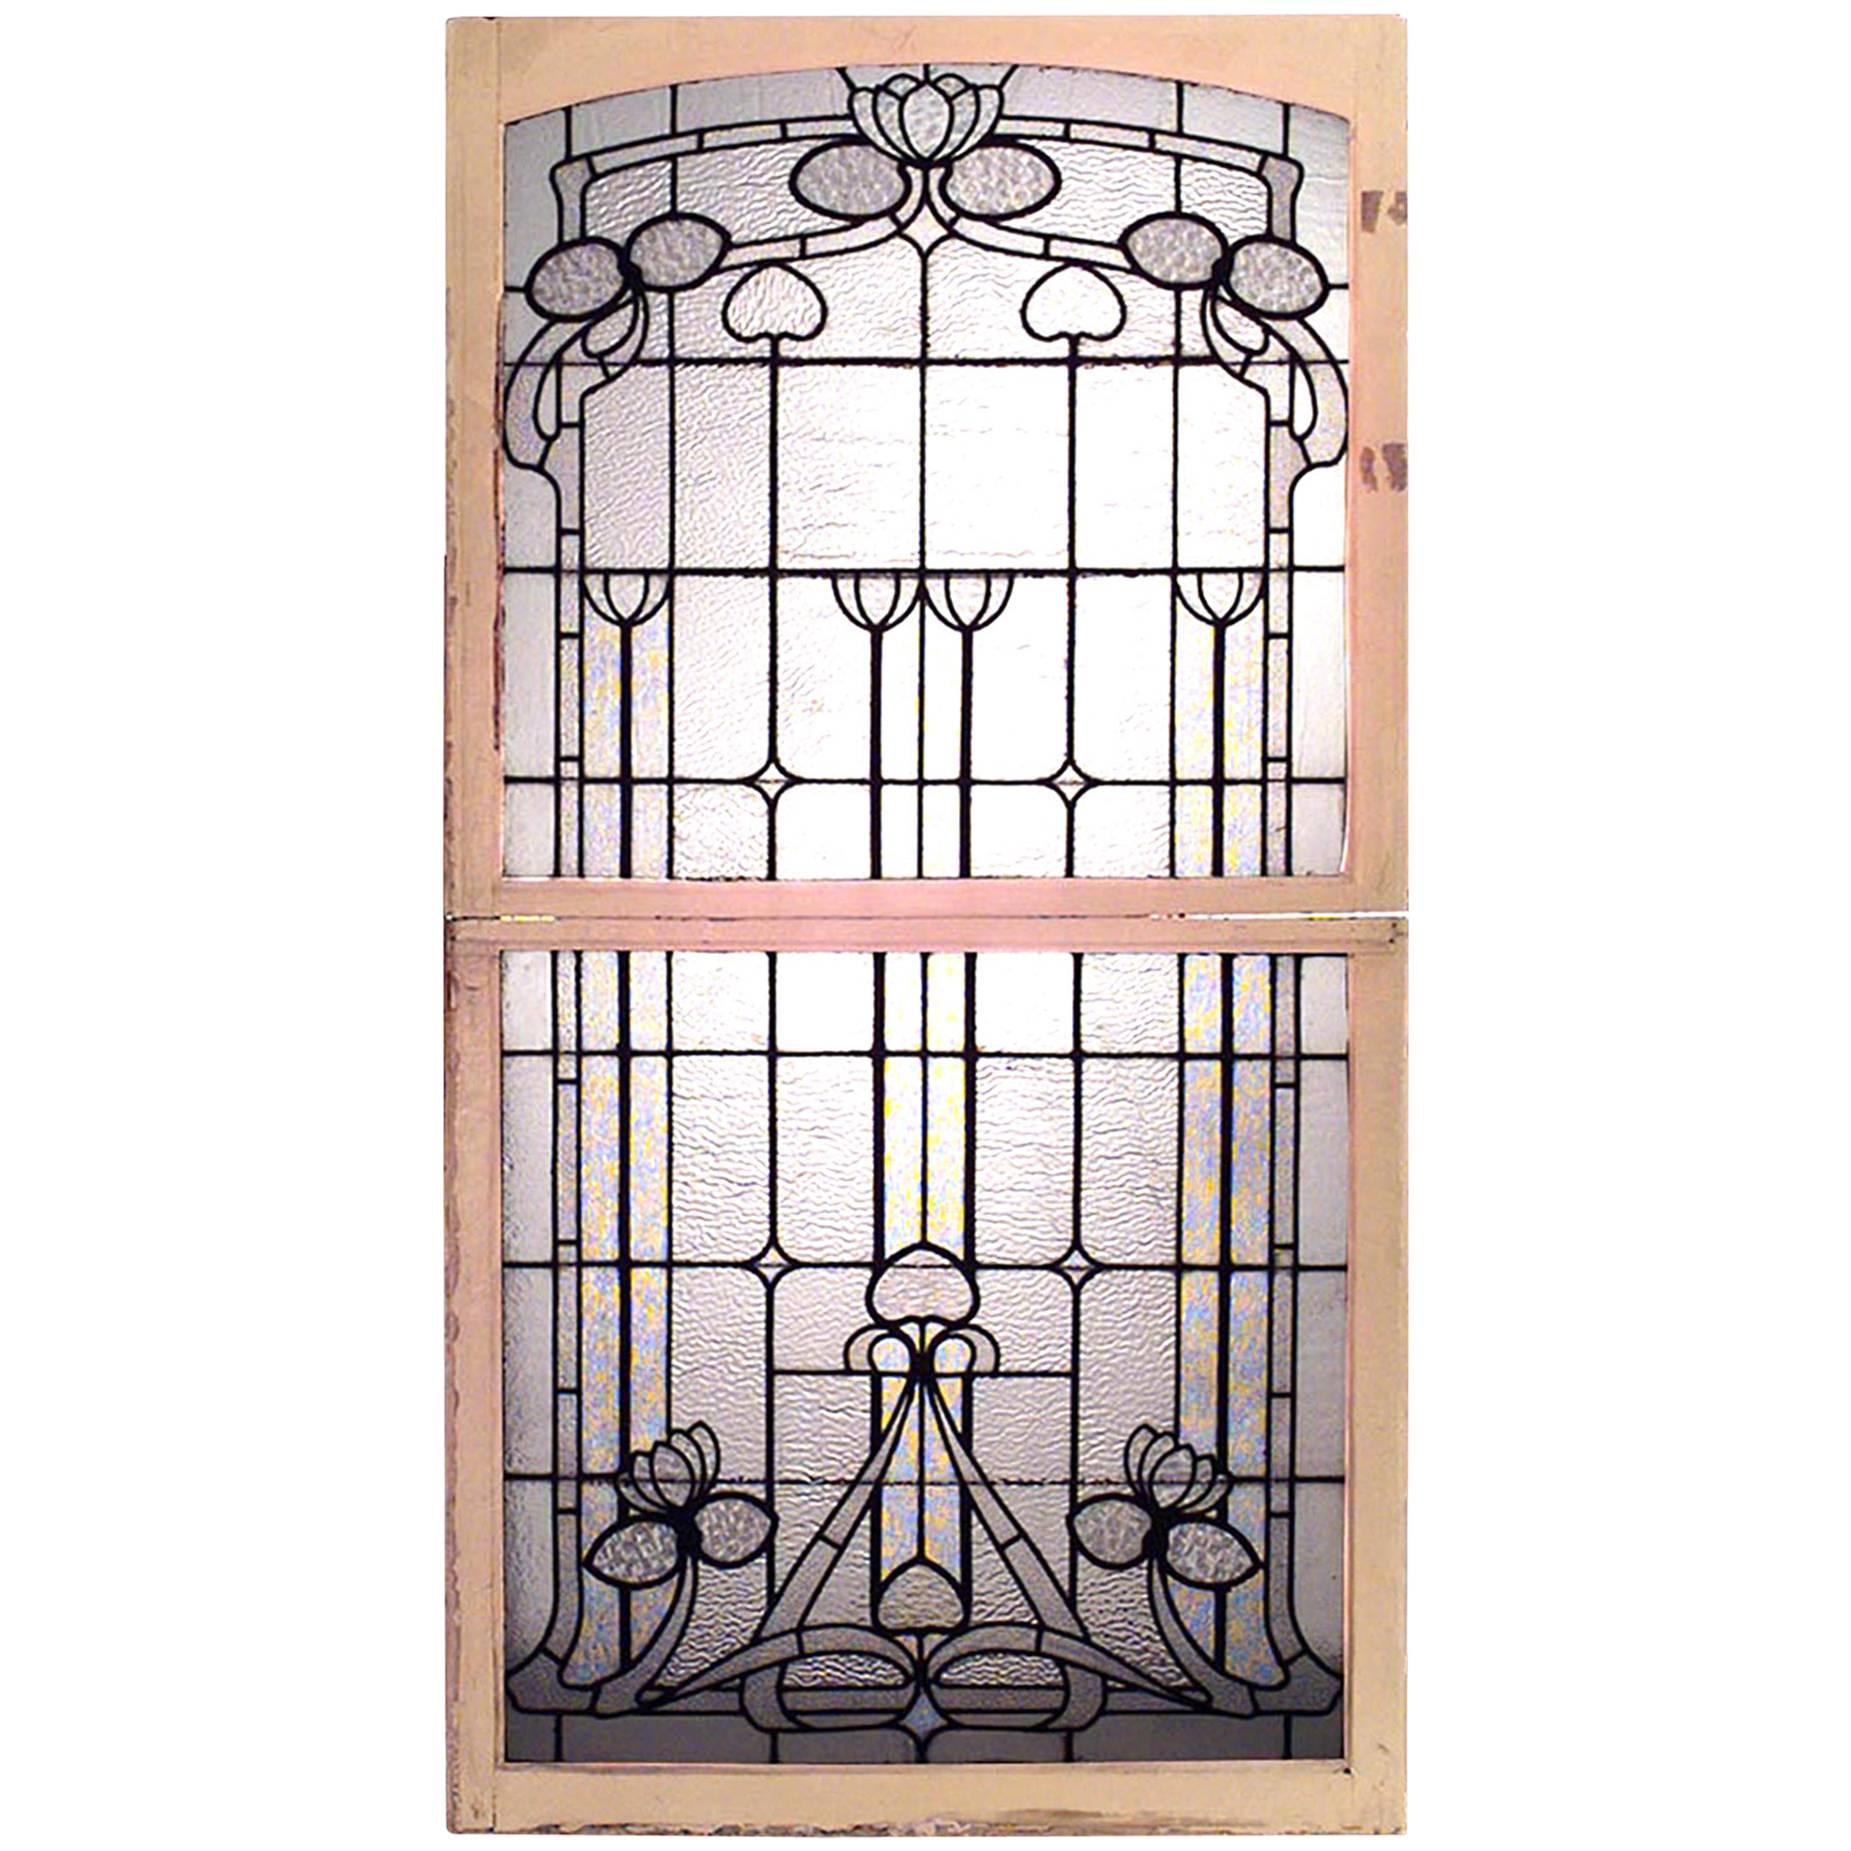 French Art Nouveau Clear and Textured Leaded Glass Double Window